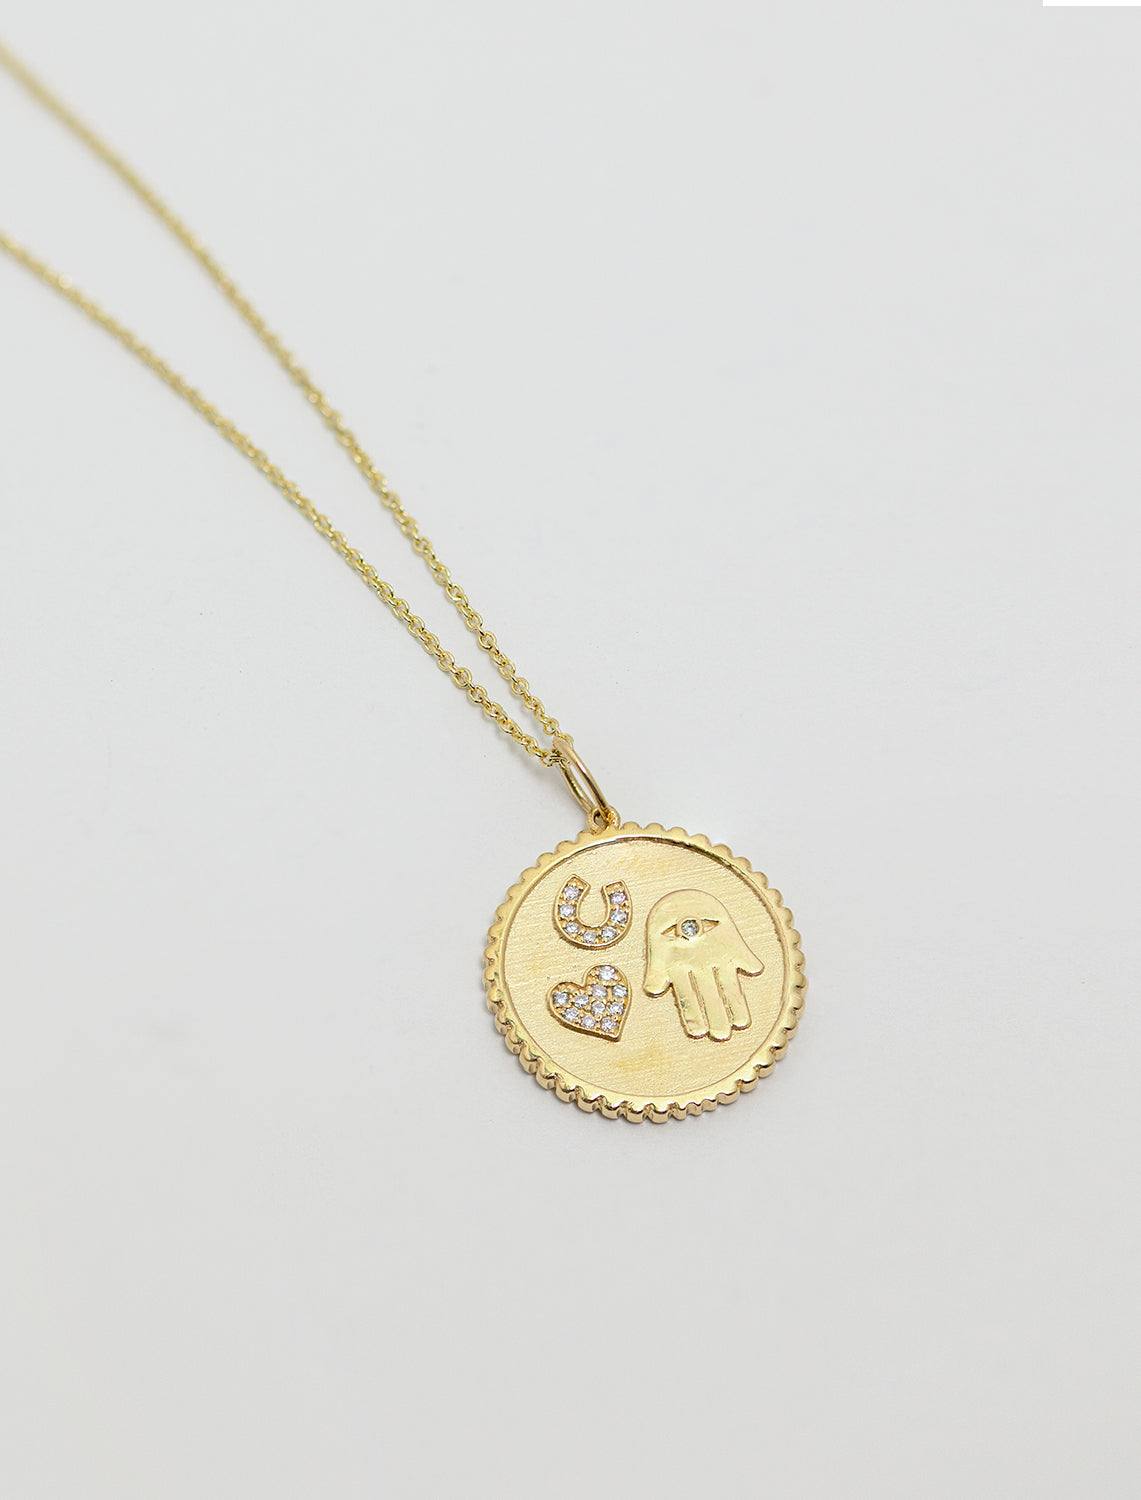 Love & Fear Coin Necklace | HART Custom Charm Jewelry